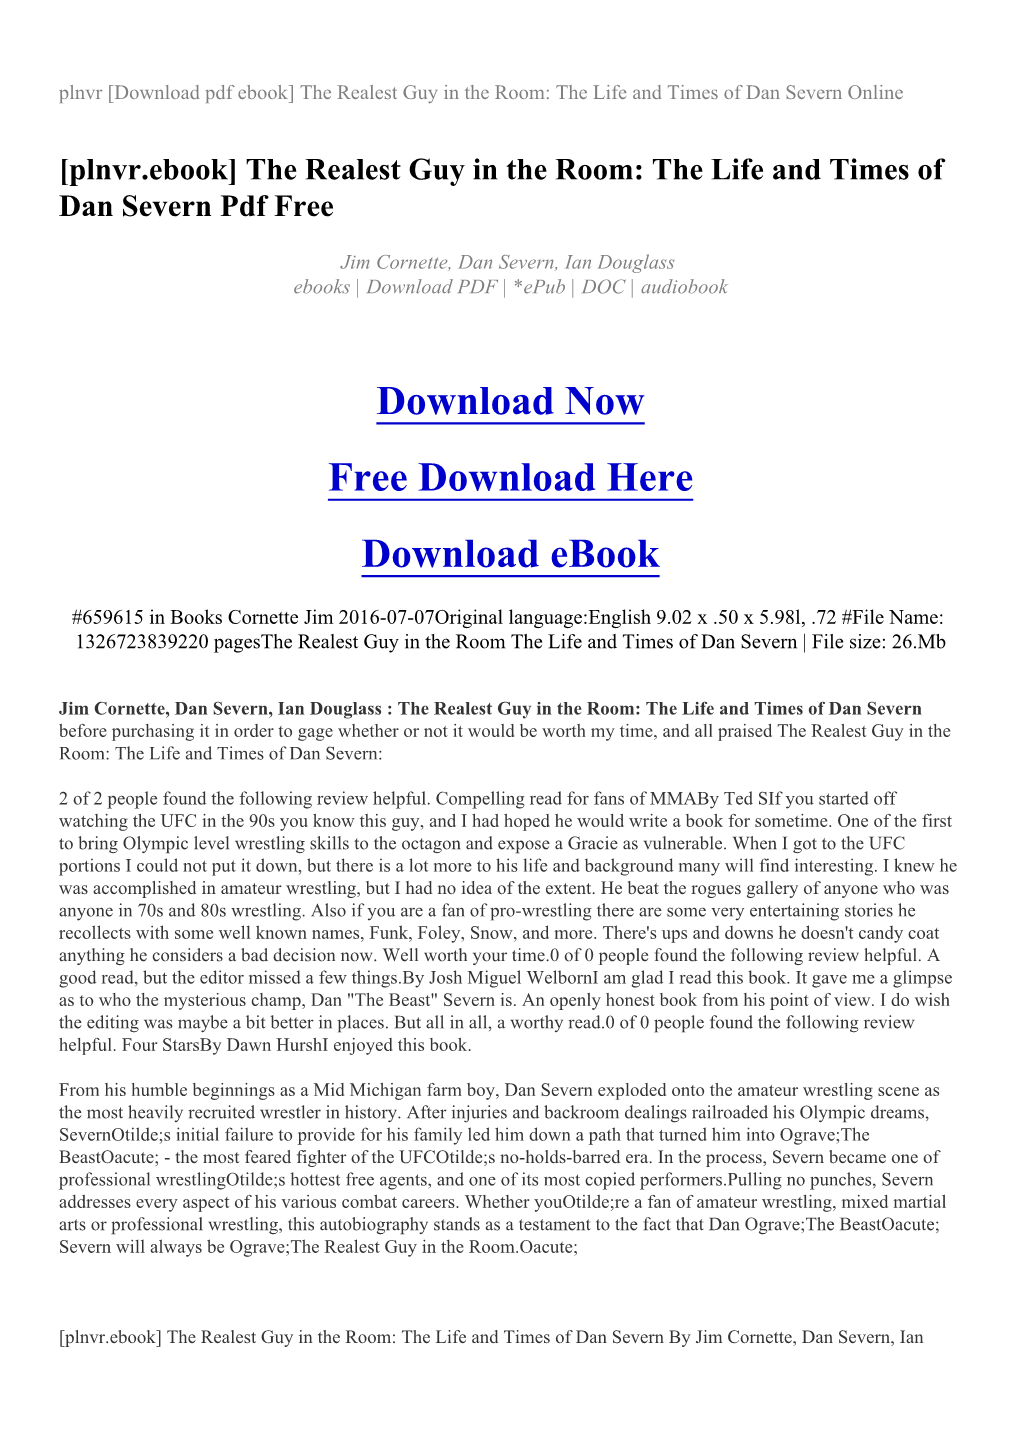 Plnvr [Download Pdf Ebook] the Realest Guy in the Room: the Life and Times of Dan Severn Online